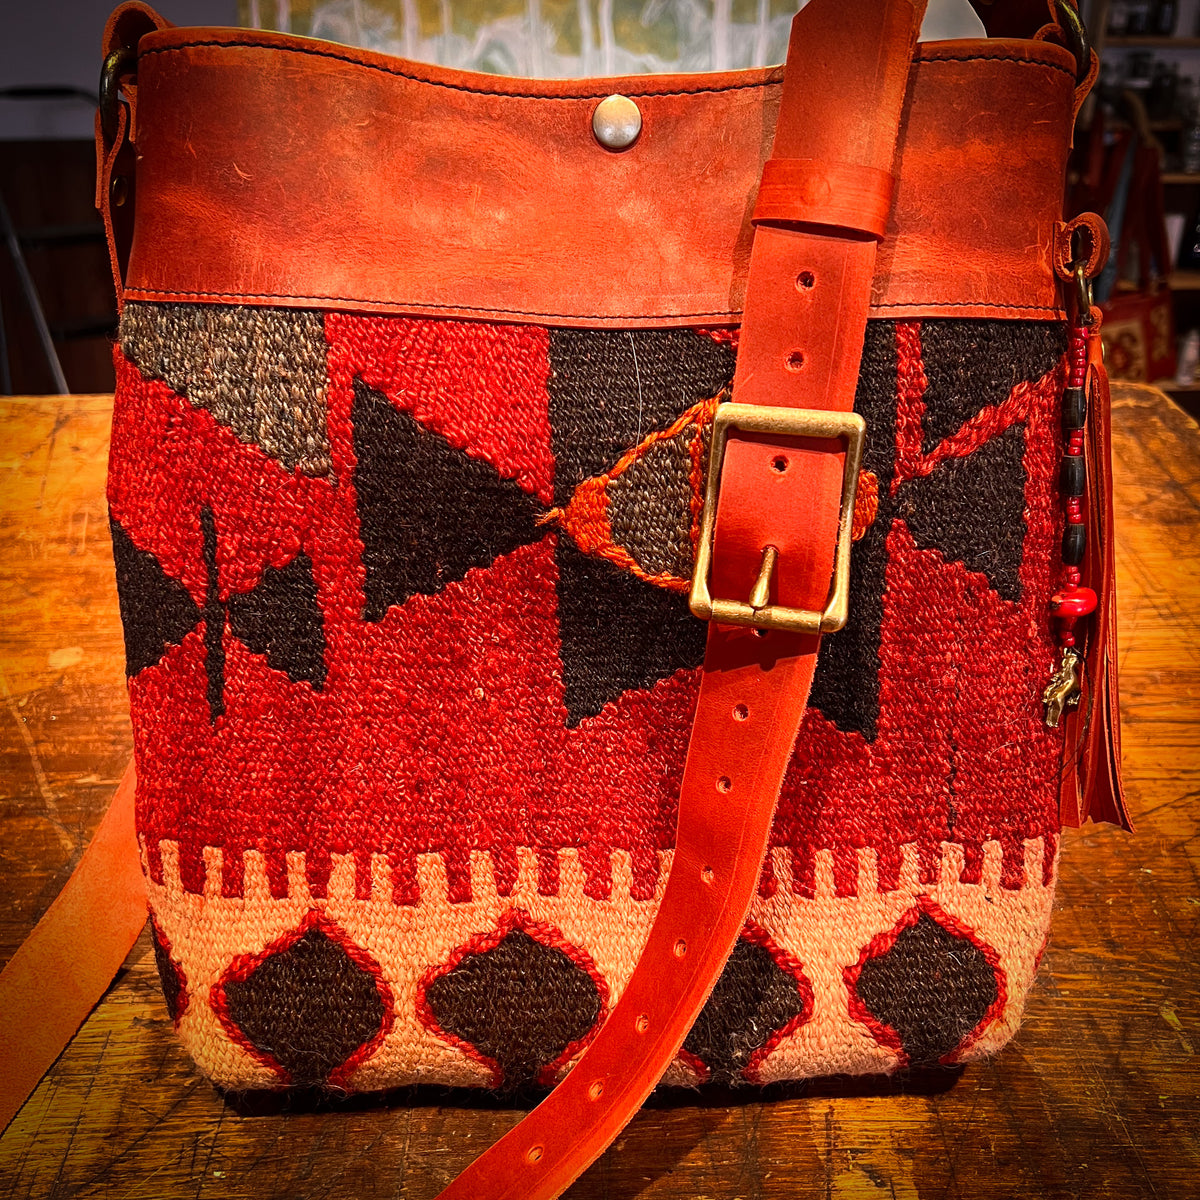 Large Tote Bag with Special Vintage Woven Rug